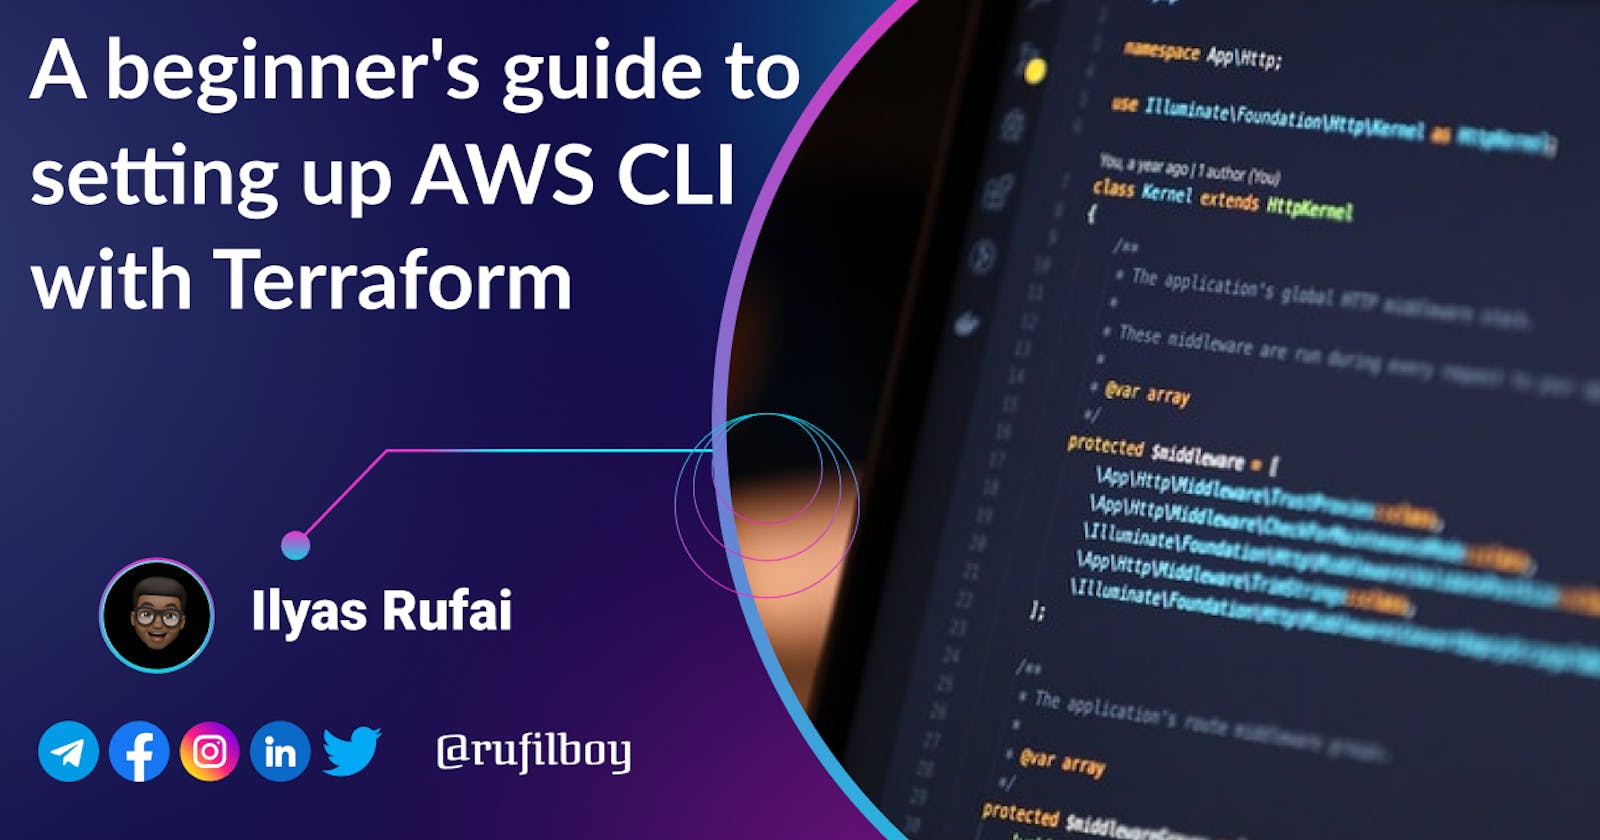 A beginner's guide to setting up AWS CLI with Terraform